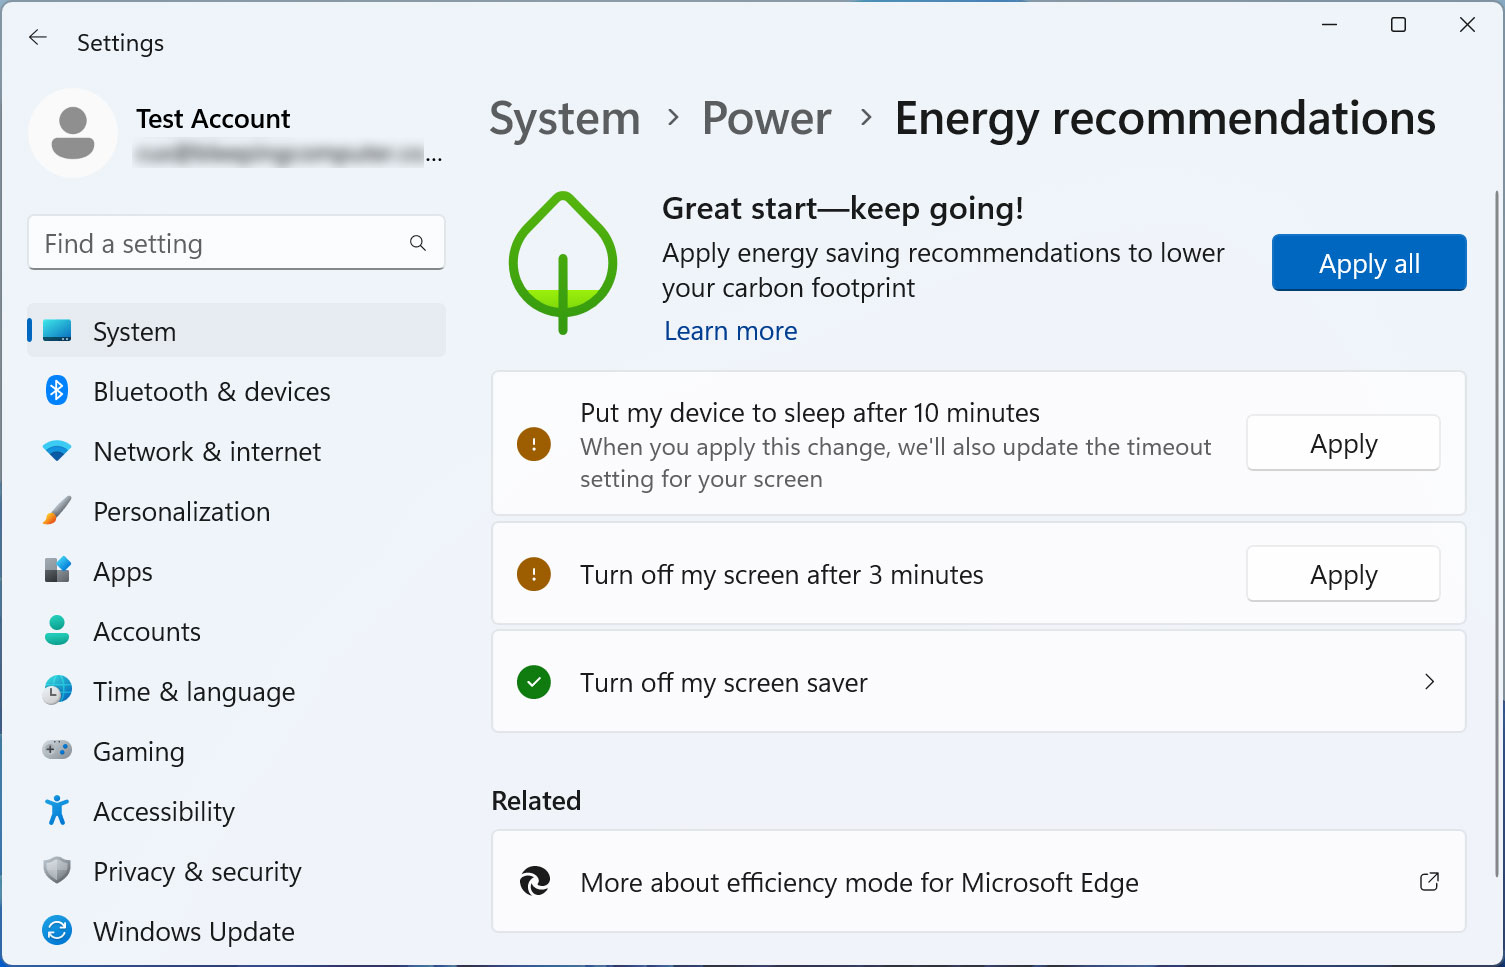 Energy recommendations Settings page